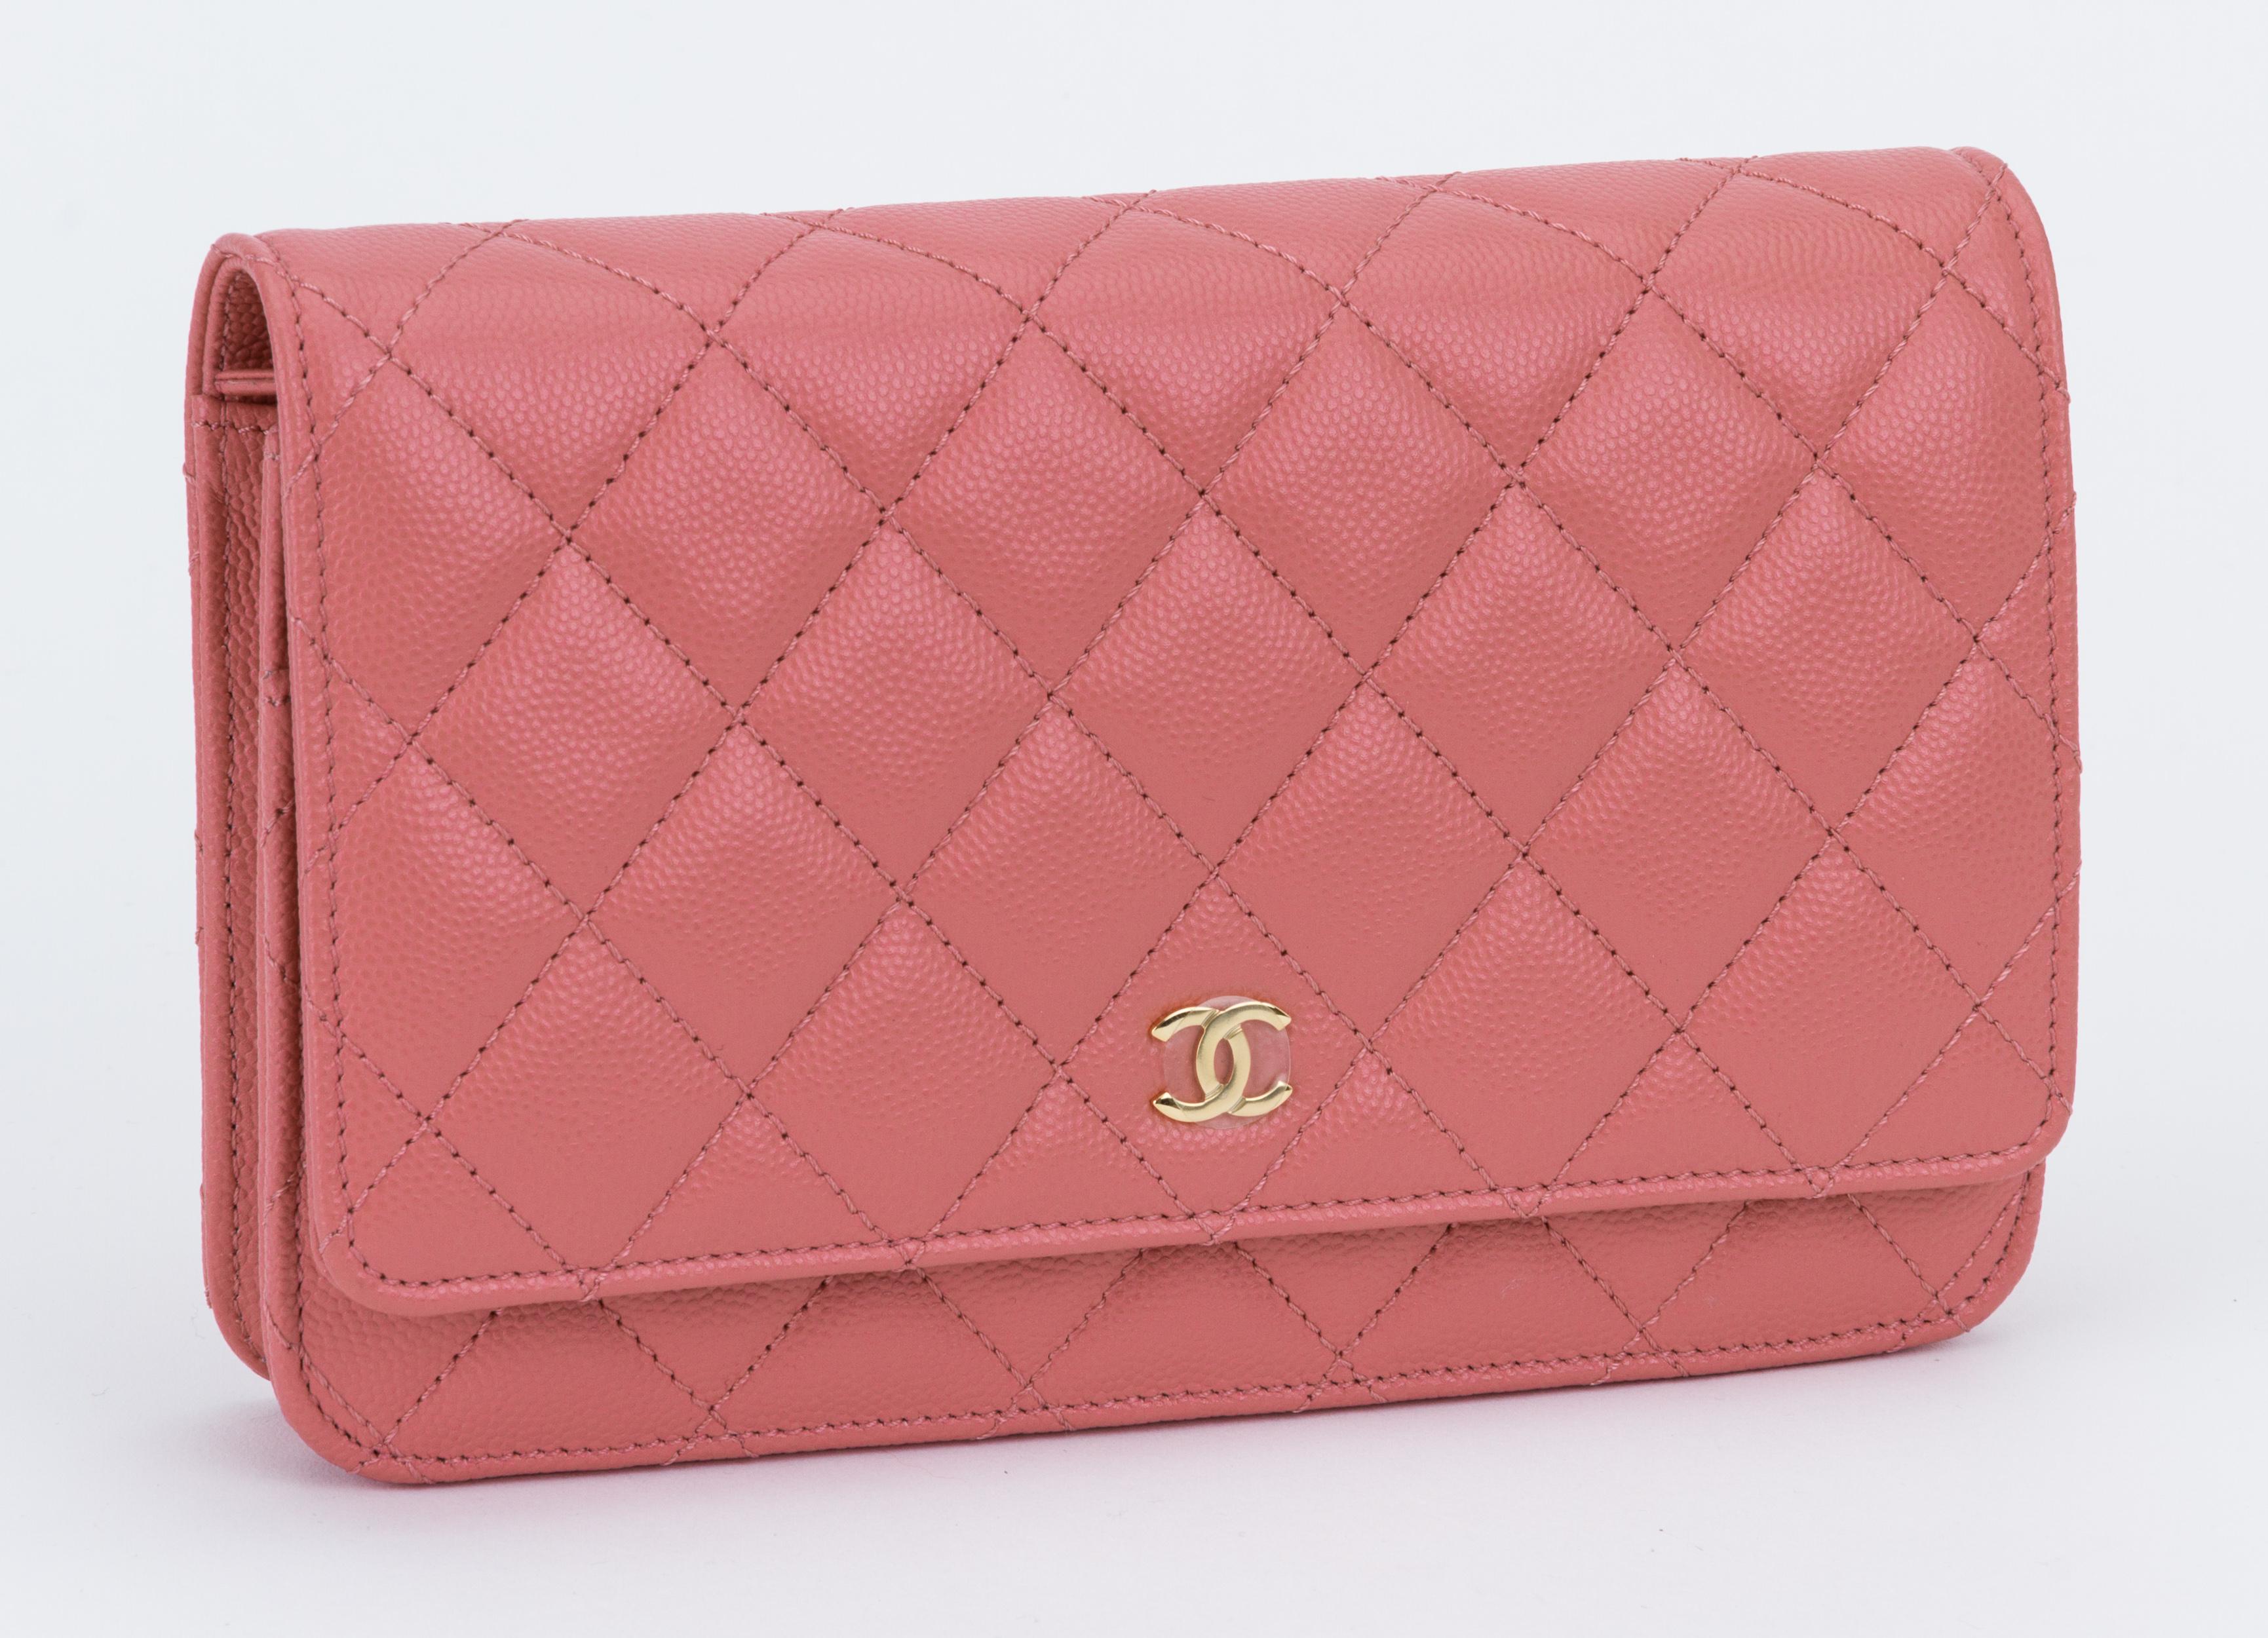 Chanel pink caviar leather cross-body wallet on a chain with gold tone hardware. Brand new , unworn condition. Comes with hologram, id card, felt and original dust cover.